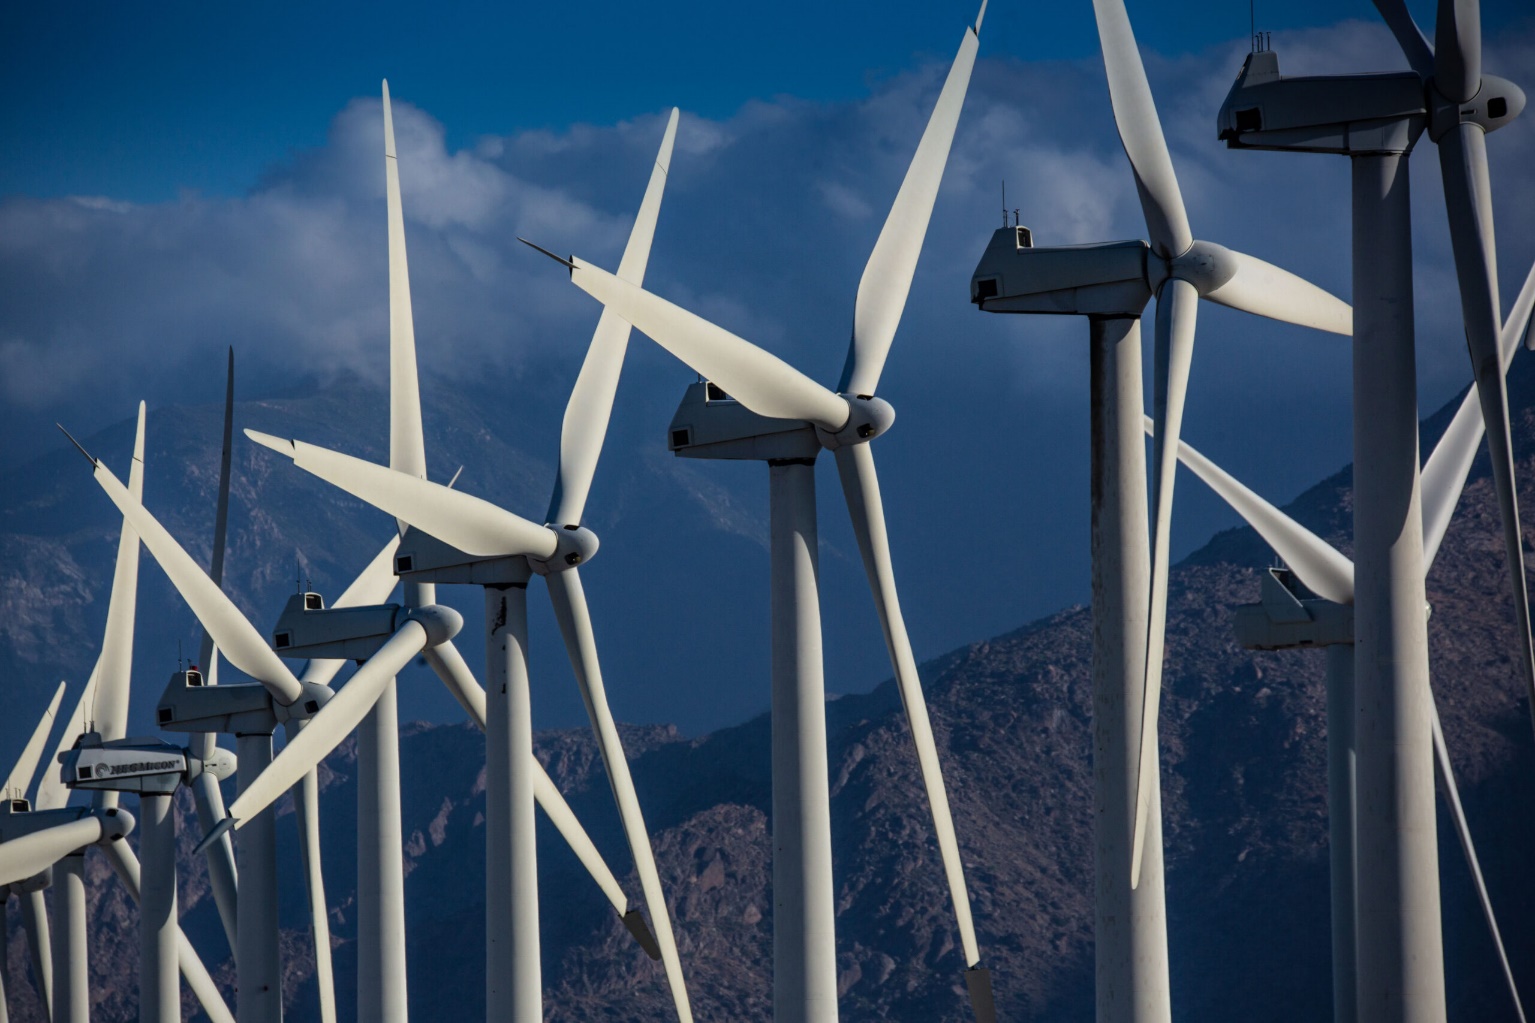 A jumble of electricity producing wind turbines are viewed along Interstate 10 on May 9, 2022 in Palm Springs, California. Credit: George Rose/Getty Images